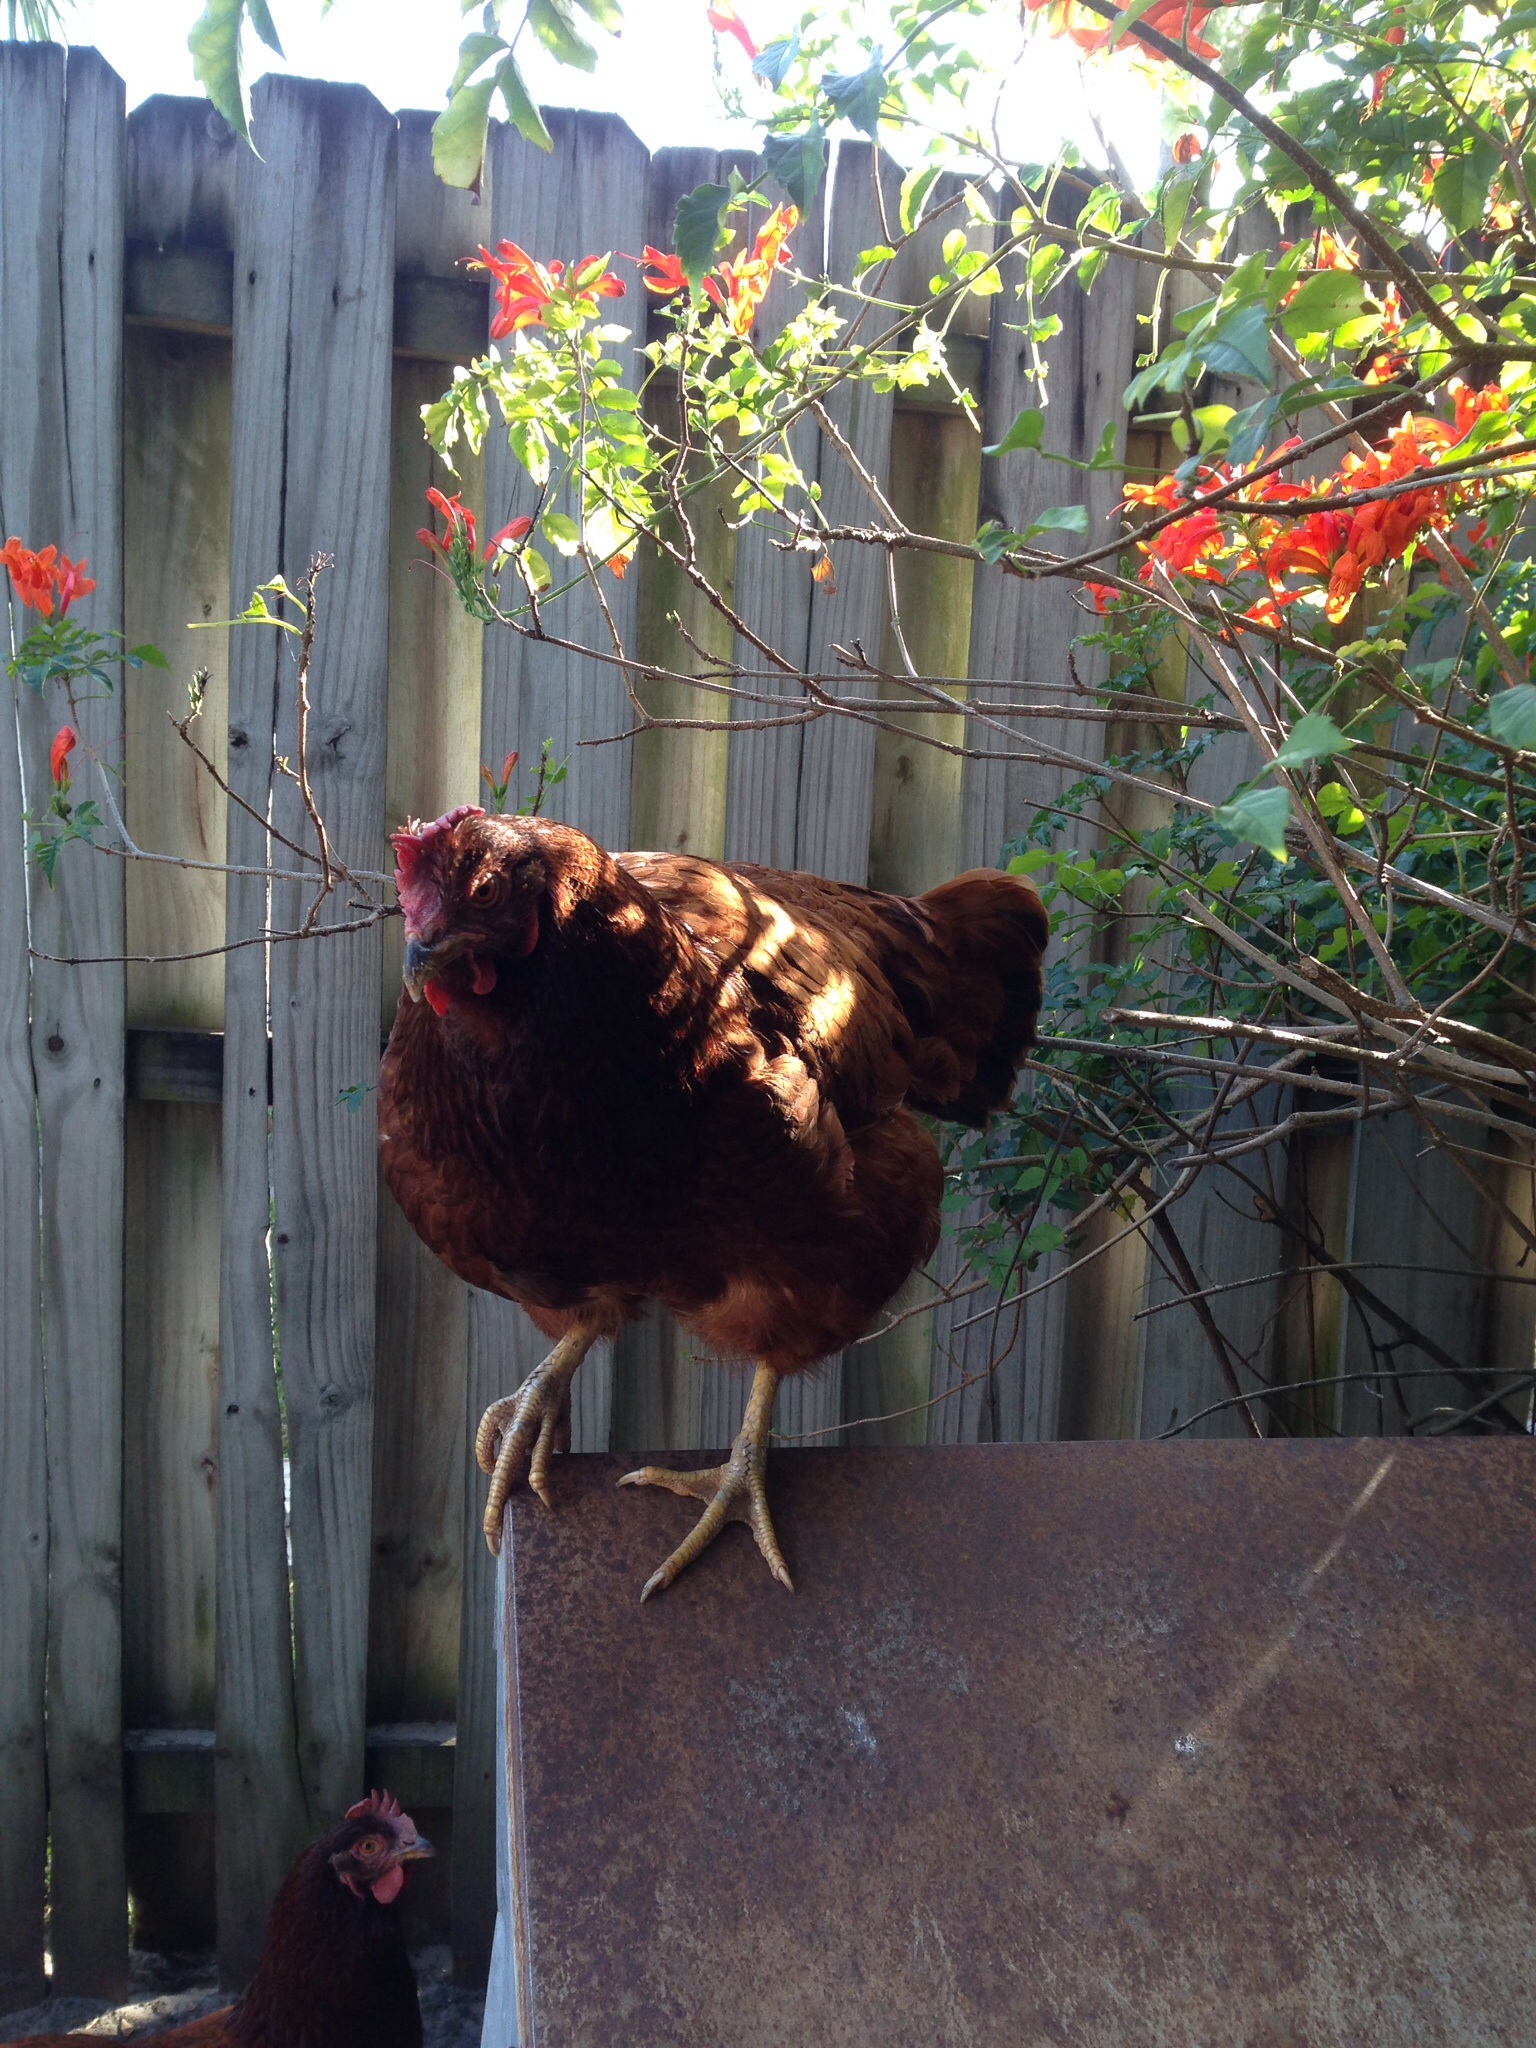 Miss Poppy our head chicken, who has managed to survive  EYP, at least for now!